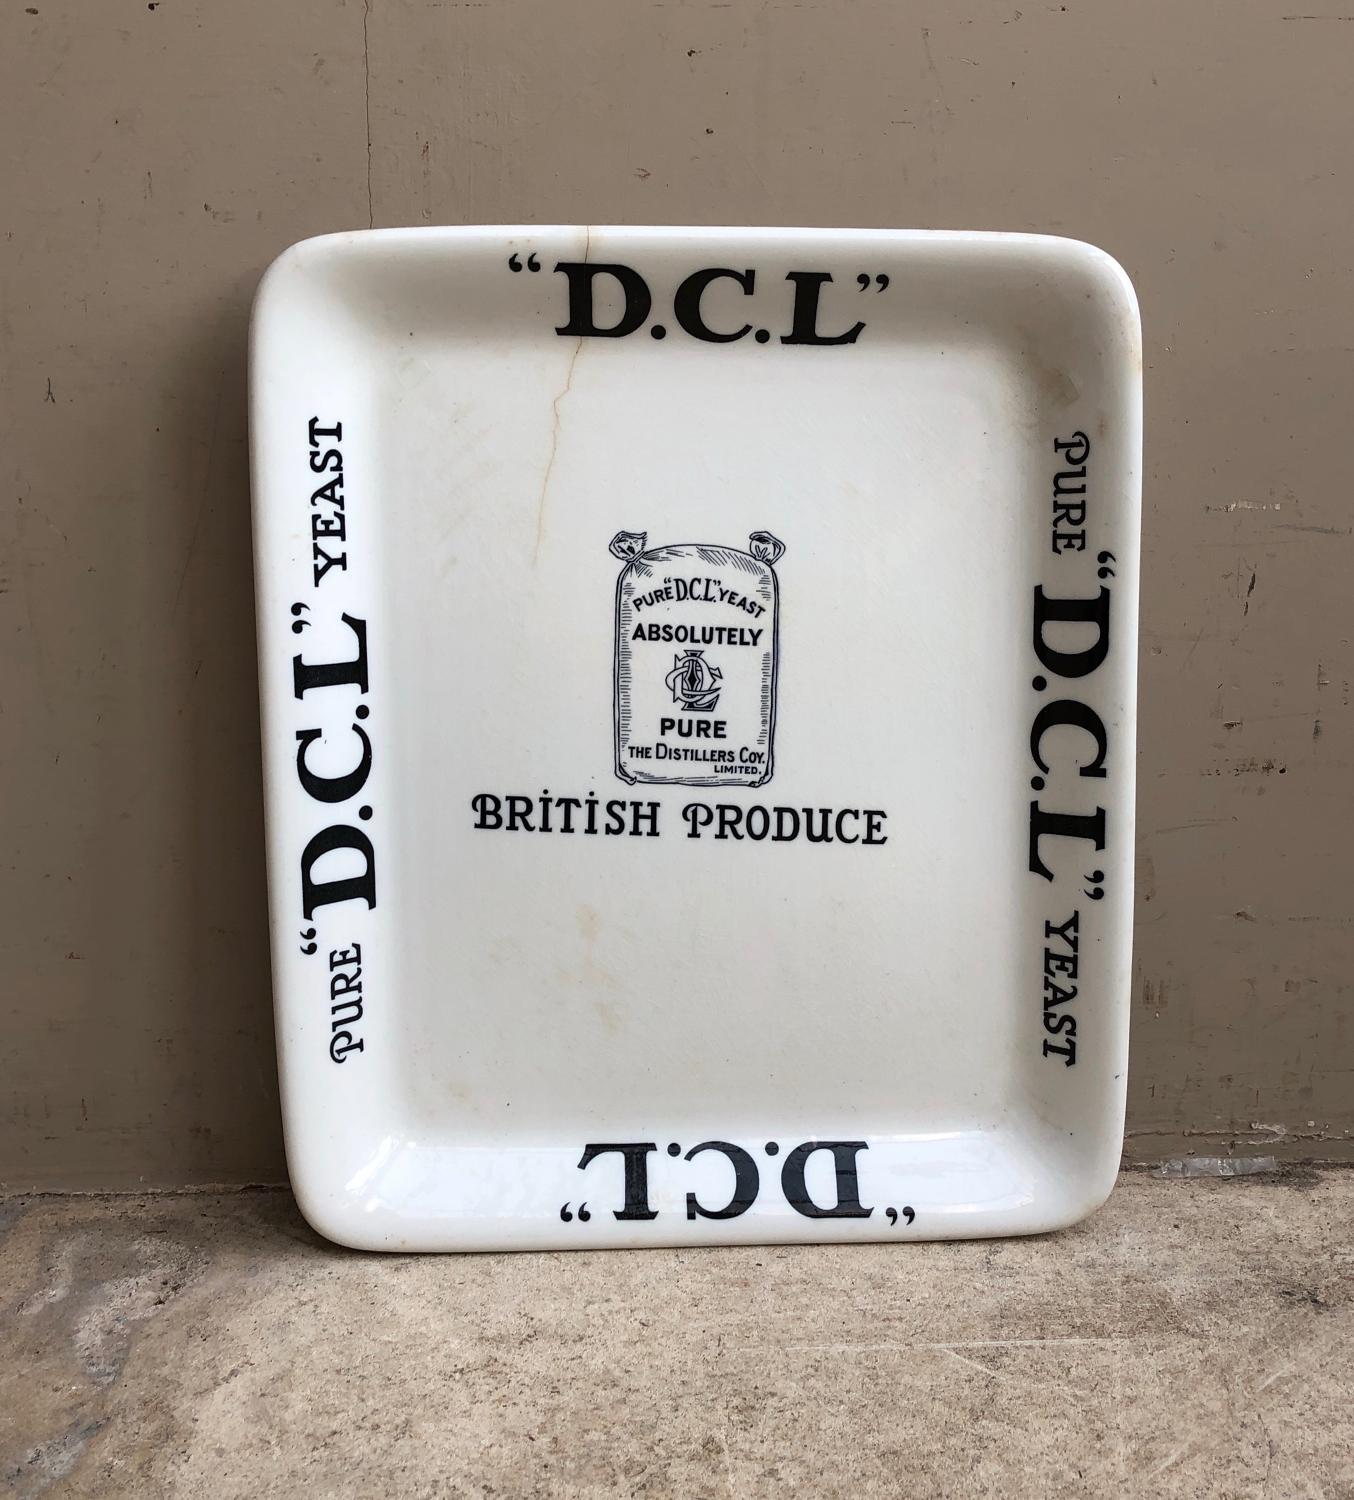 Edwardian Grocers Advertising Plate - DCL Yeast